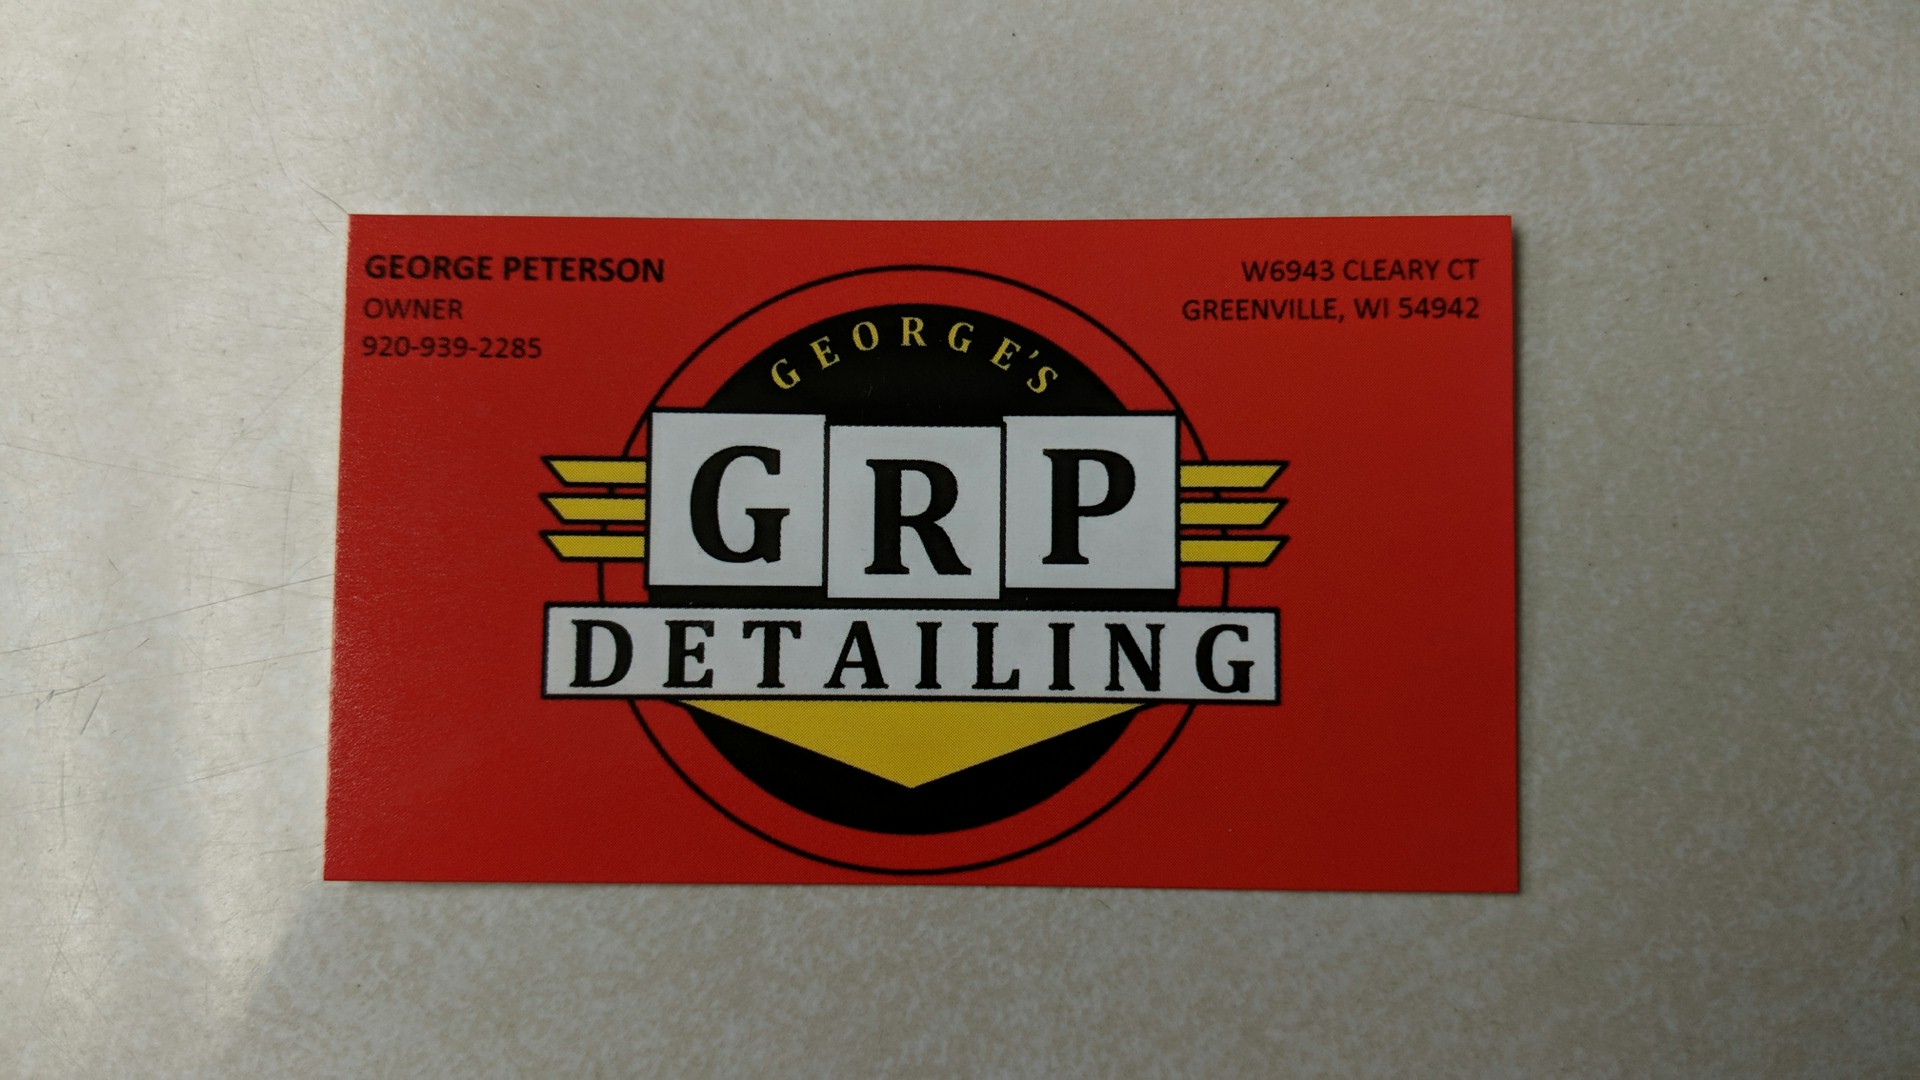 GRP Detailing 6943 Cleary Ct, Greenville Wisconsin 54942